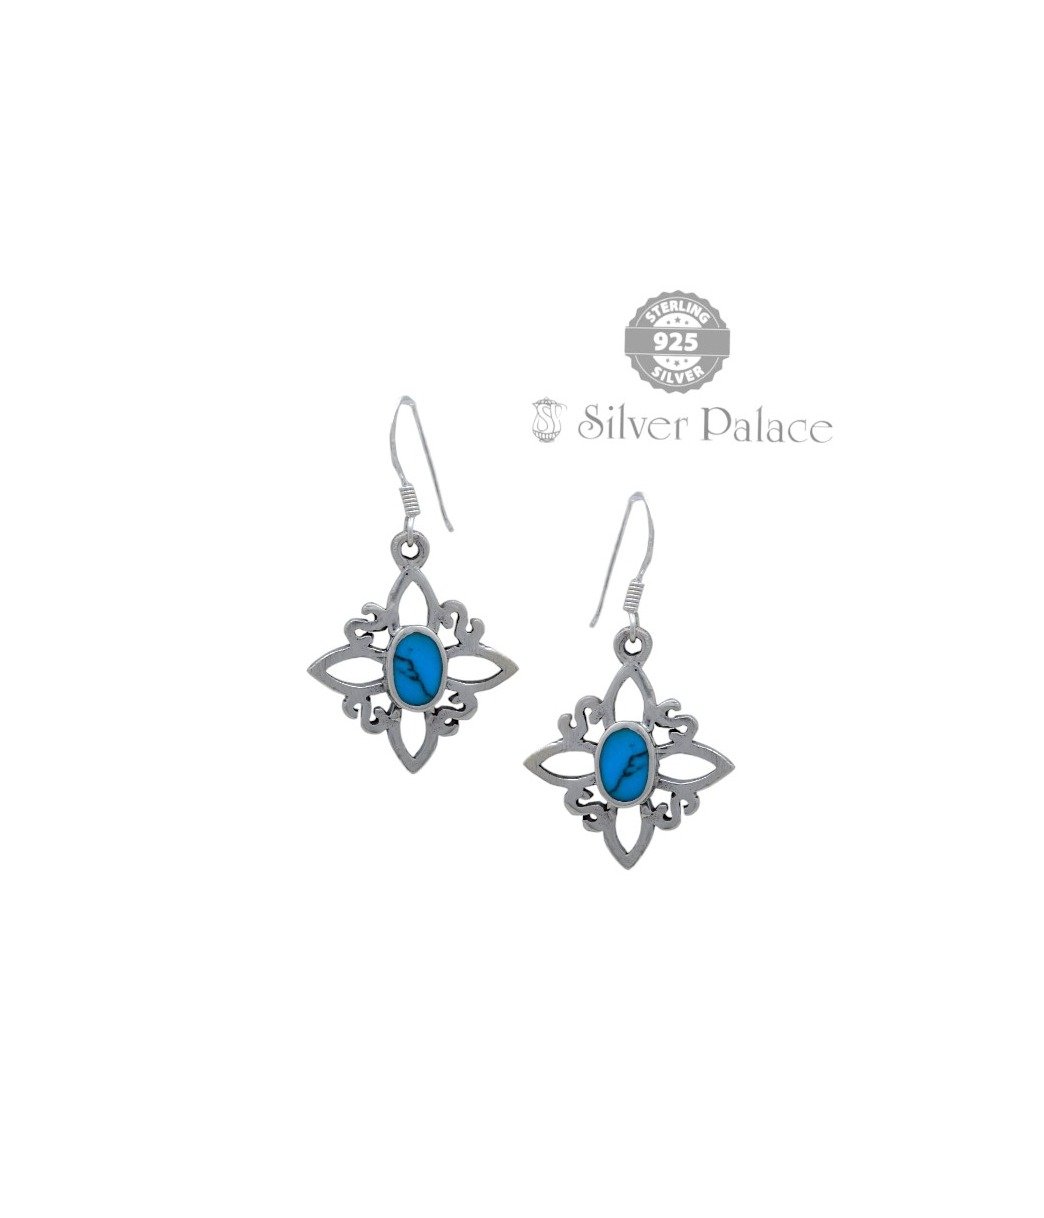 PURE SILVER WITH FLOWER DESIGN EARRINGS TRISHE COLLECTION FOR GIRLS